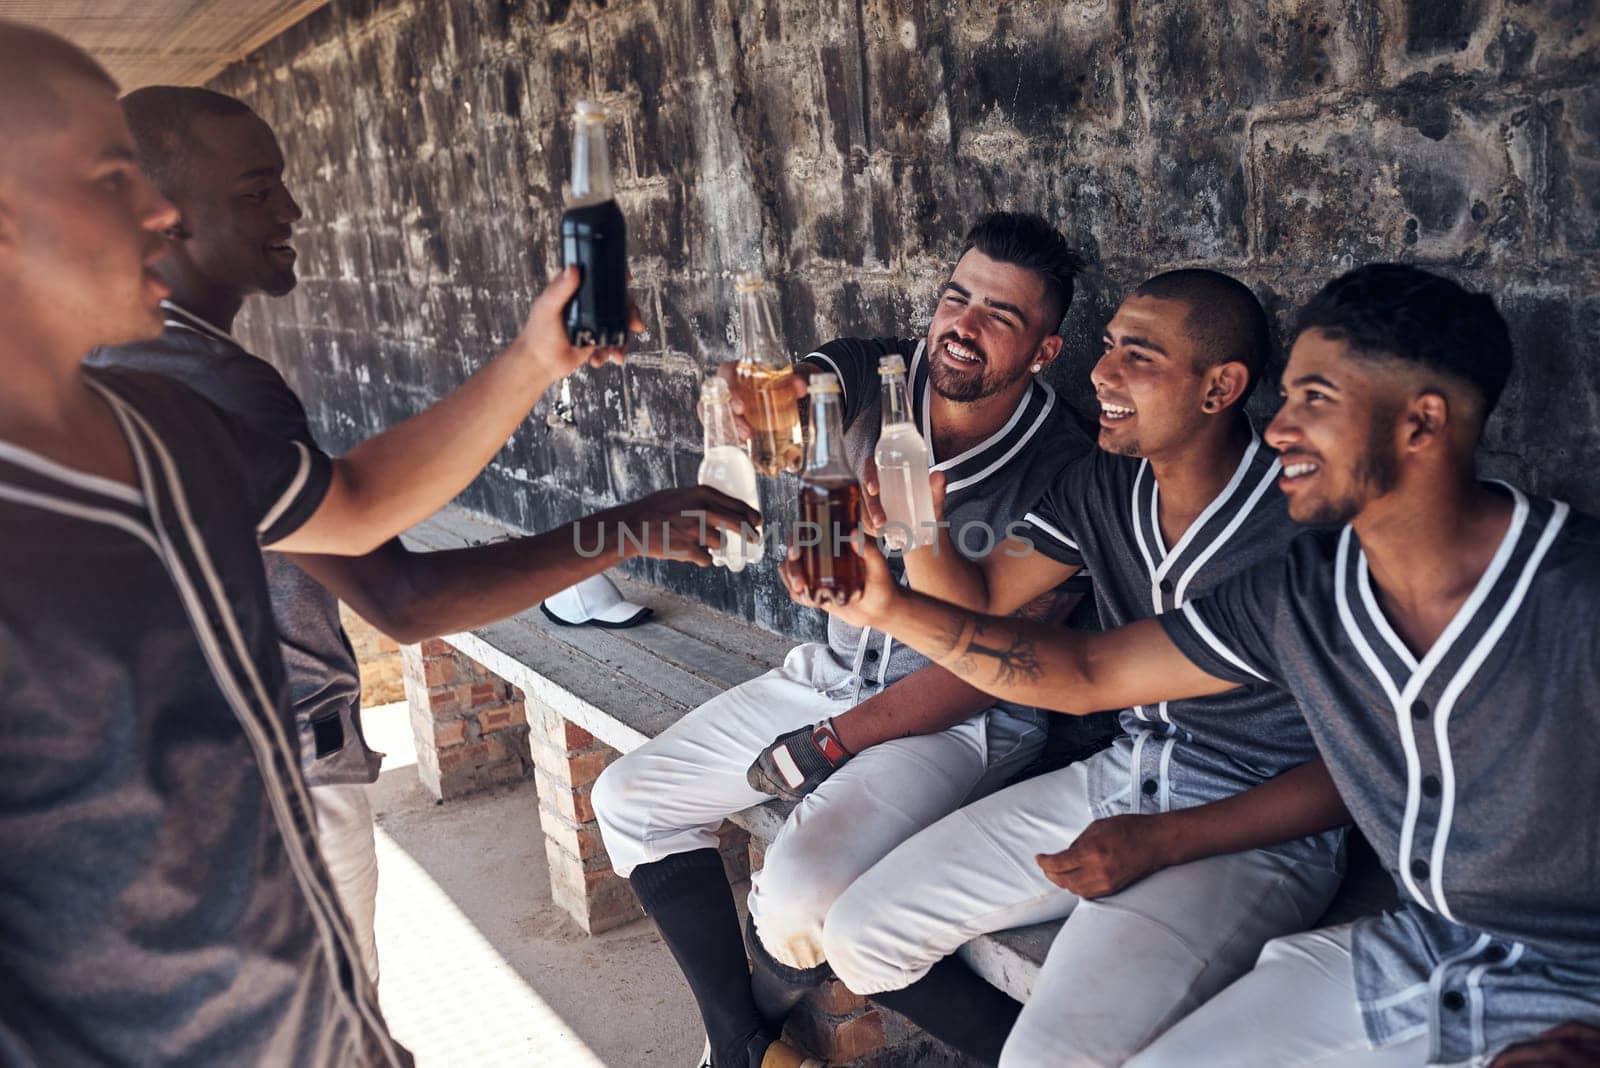 Cheers to the champs. a group of young men celebrating with drinks after playing a baseball game